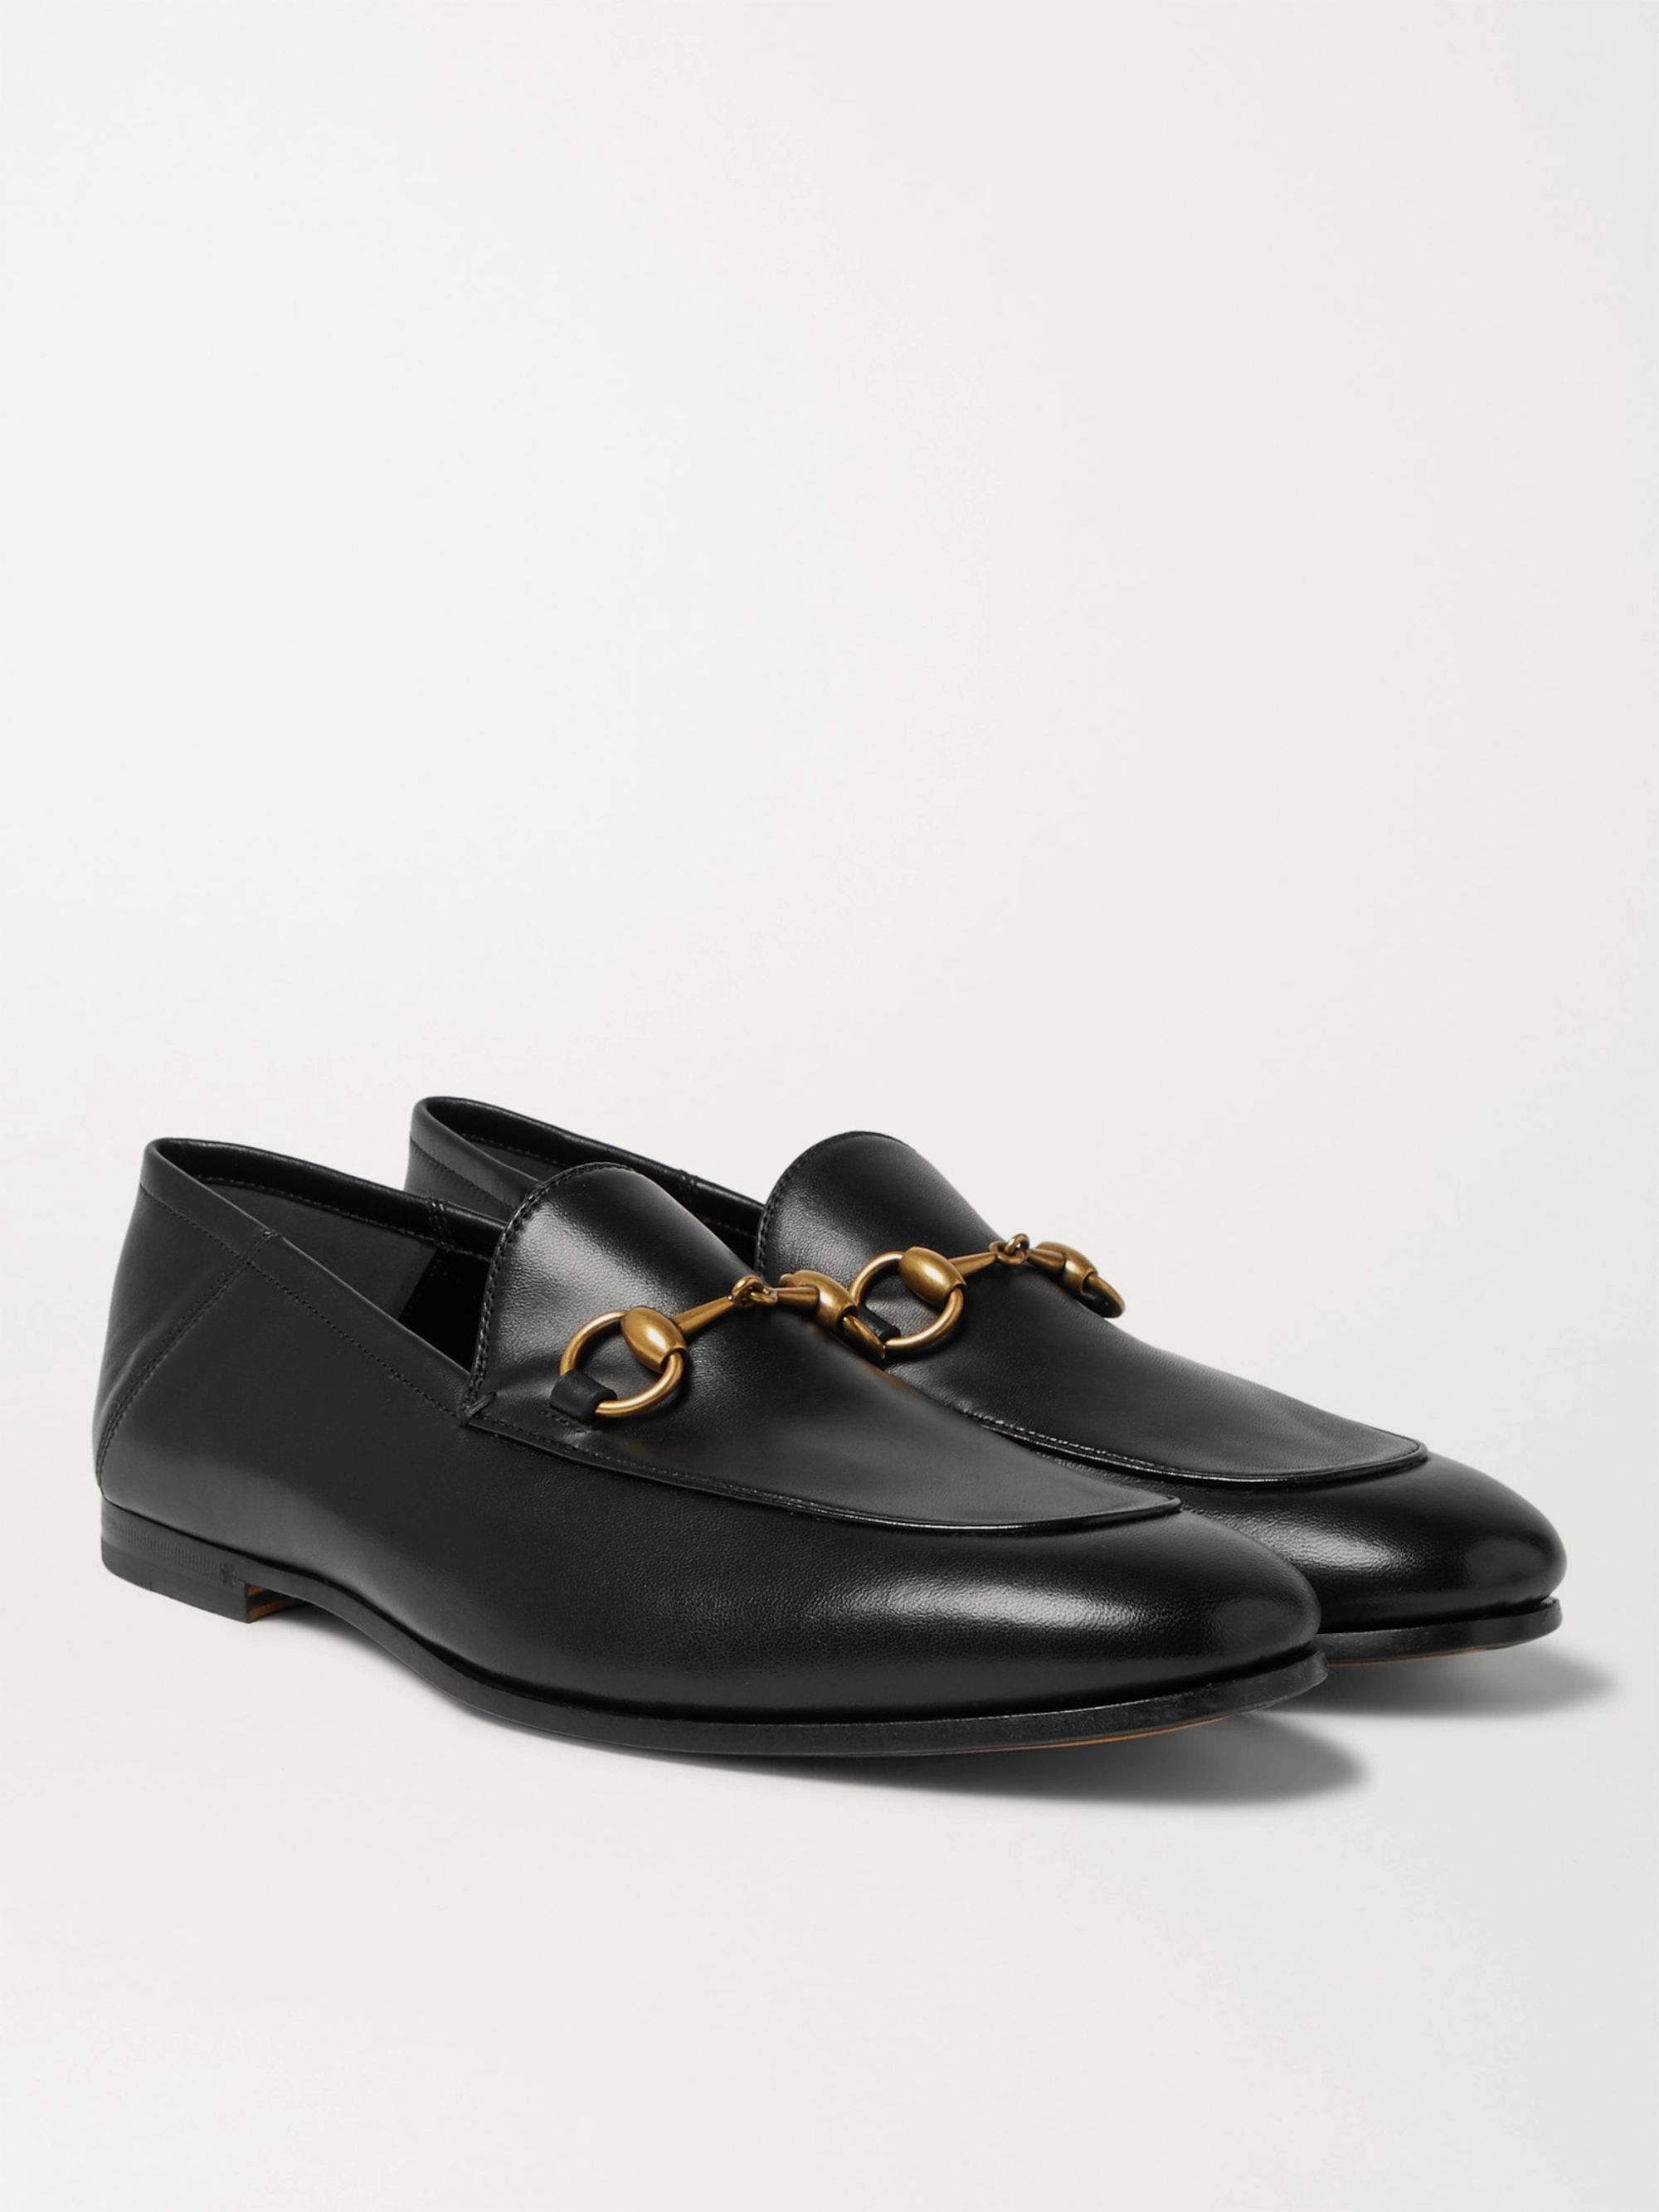 gucci collapsible heel loafer